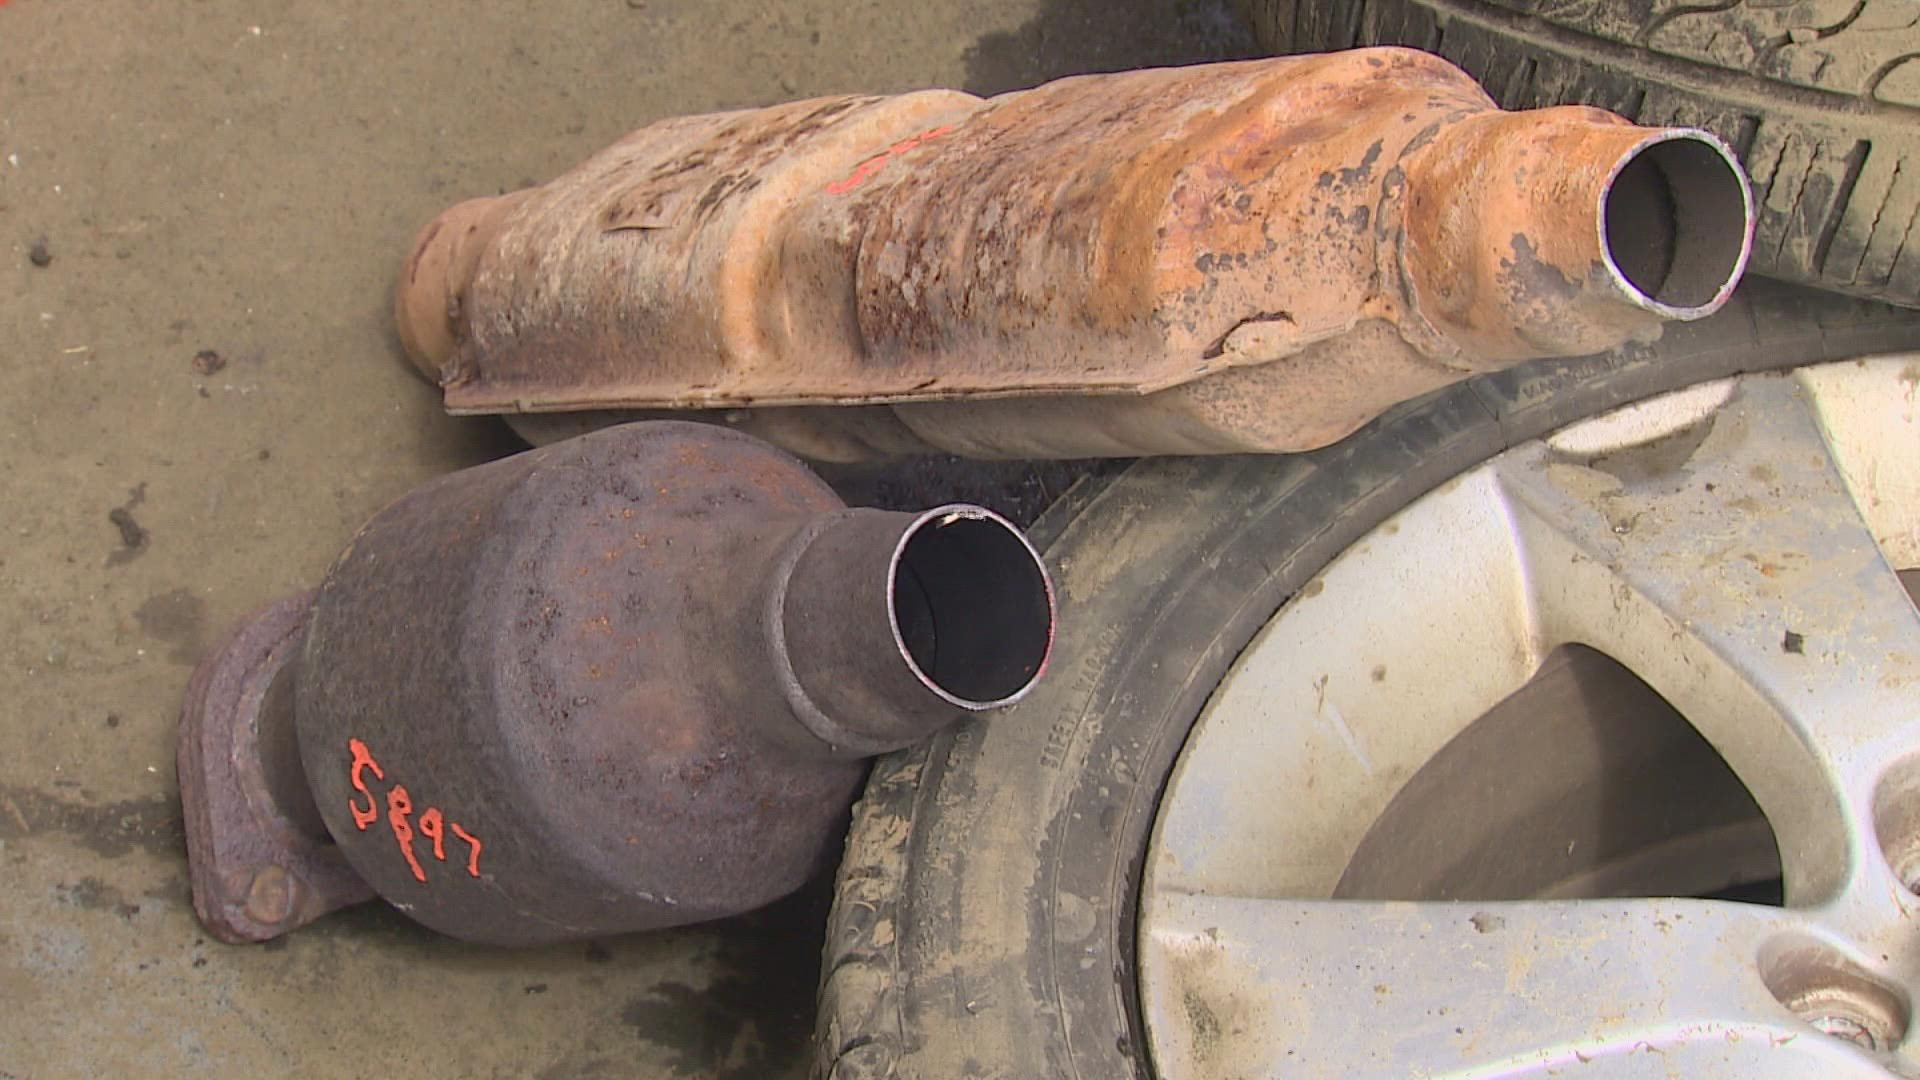 Cash transactions for catalytic converters will be prohibited July 1 in Washington, which auto wreckers say will impact their business.